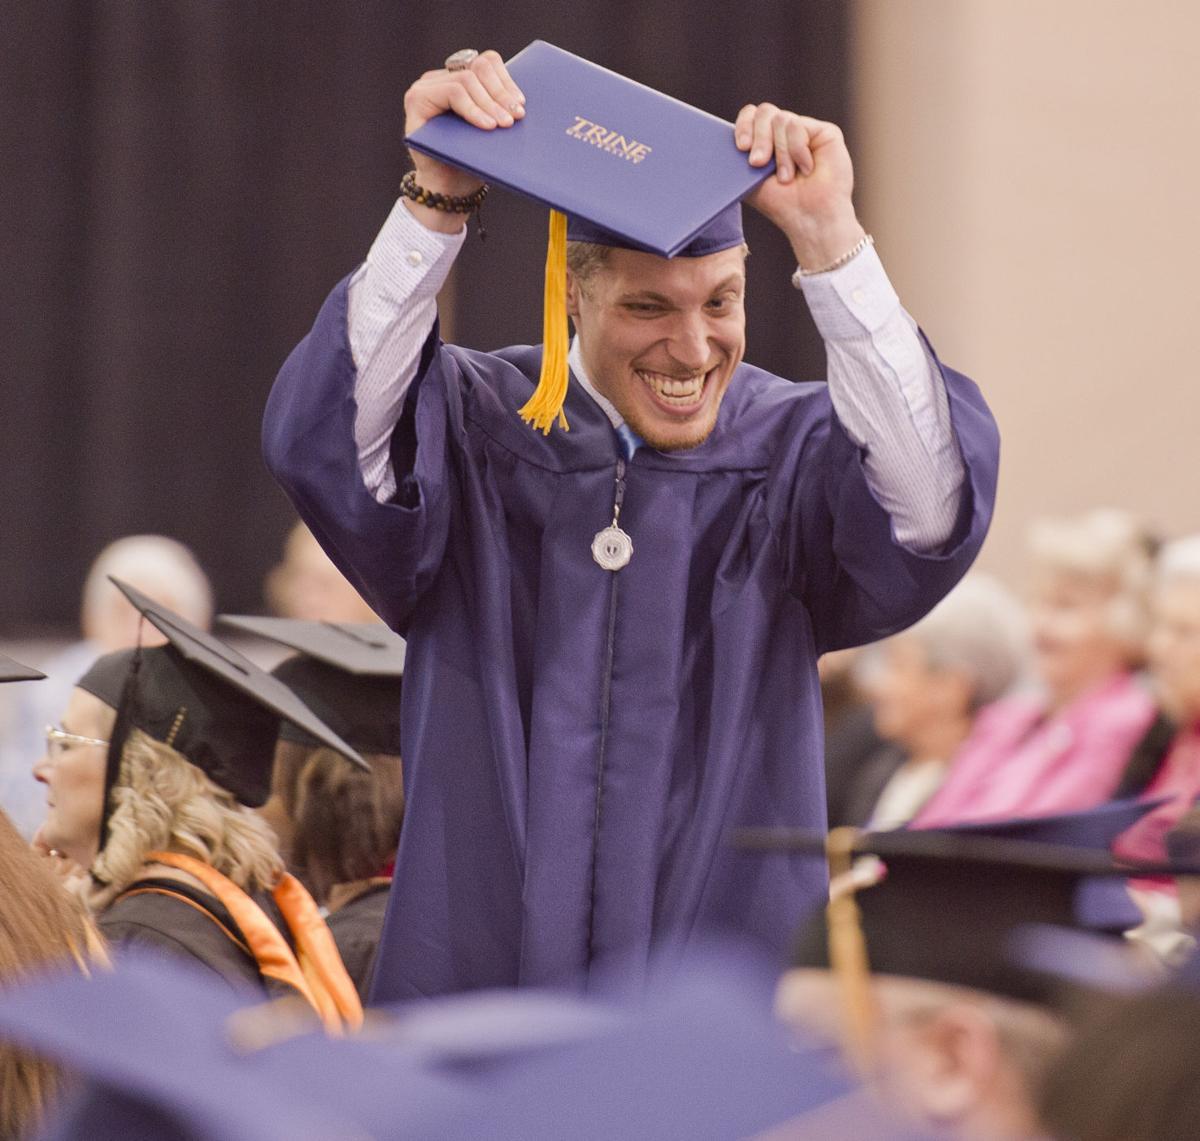 Crouch talks about life's ups and downs in Trine commencement address